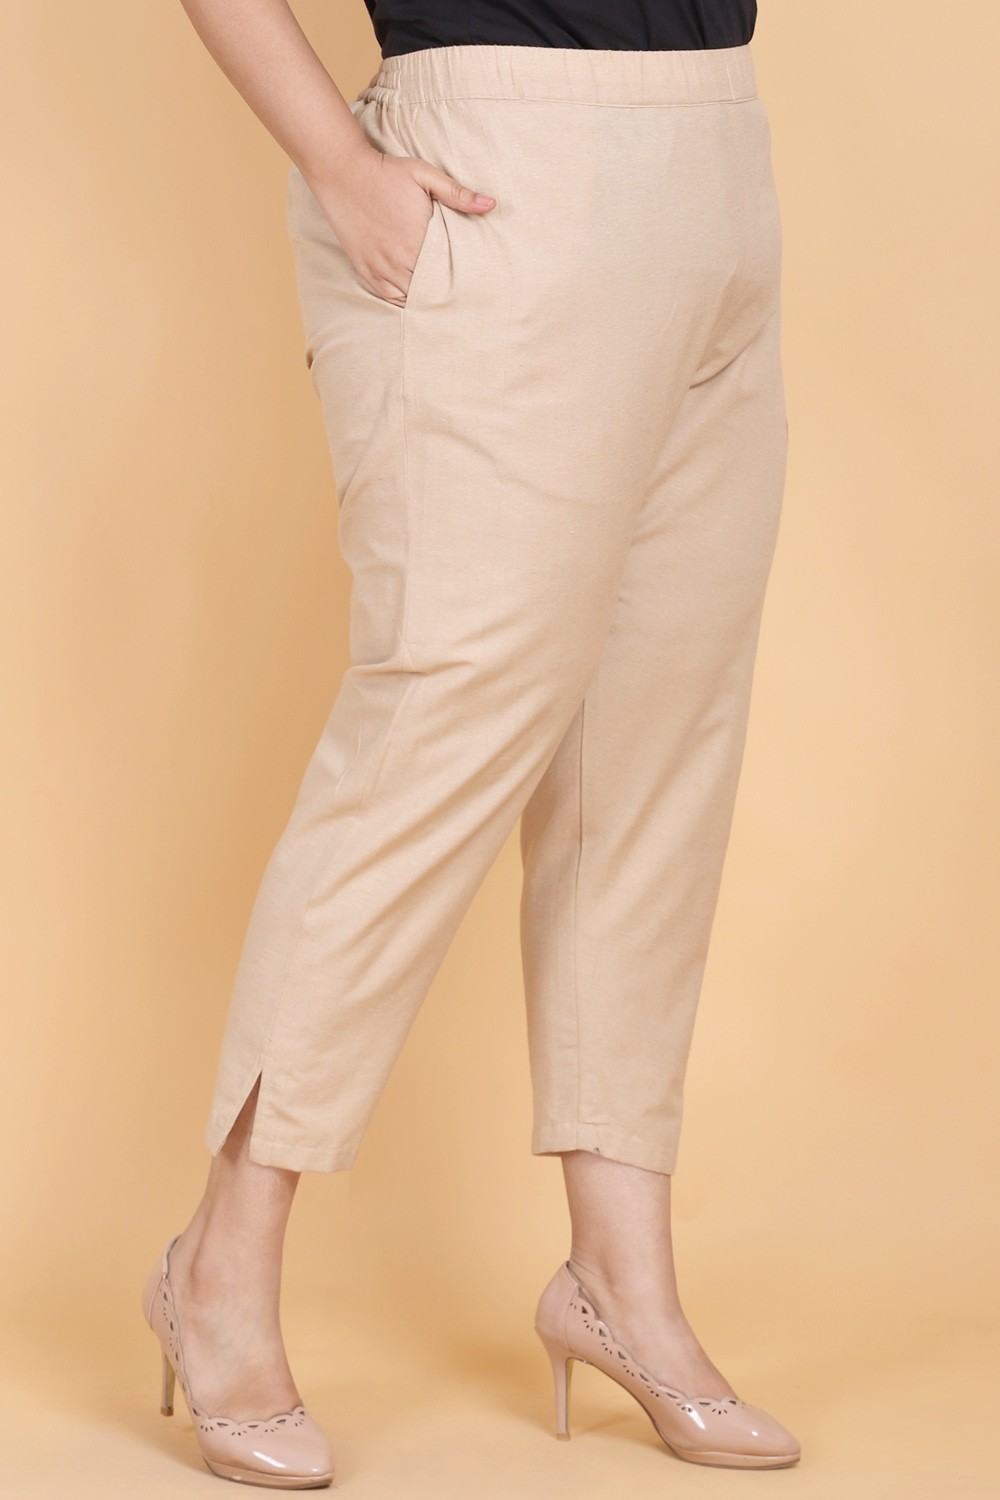 11 Best Travel Pants For Women 2024 - Forbes Vetted